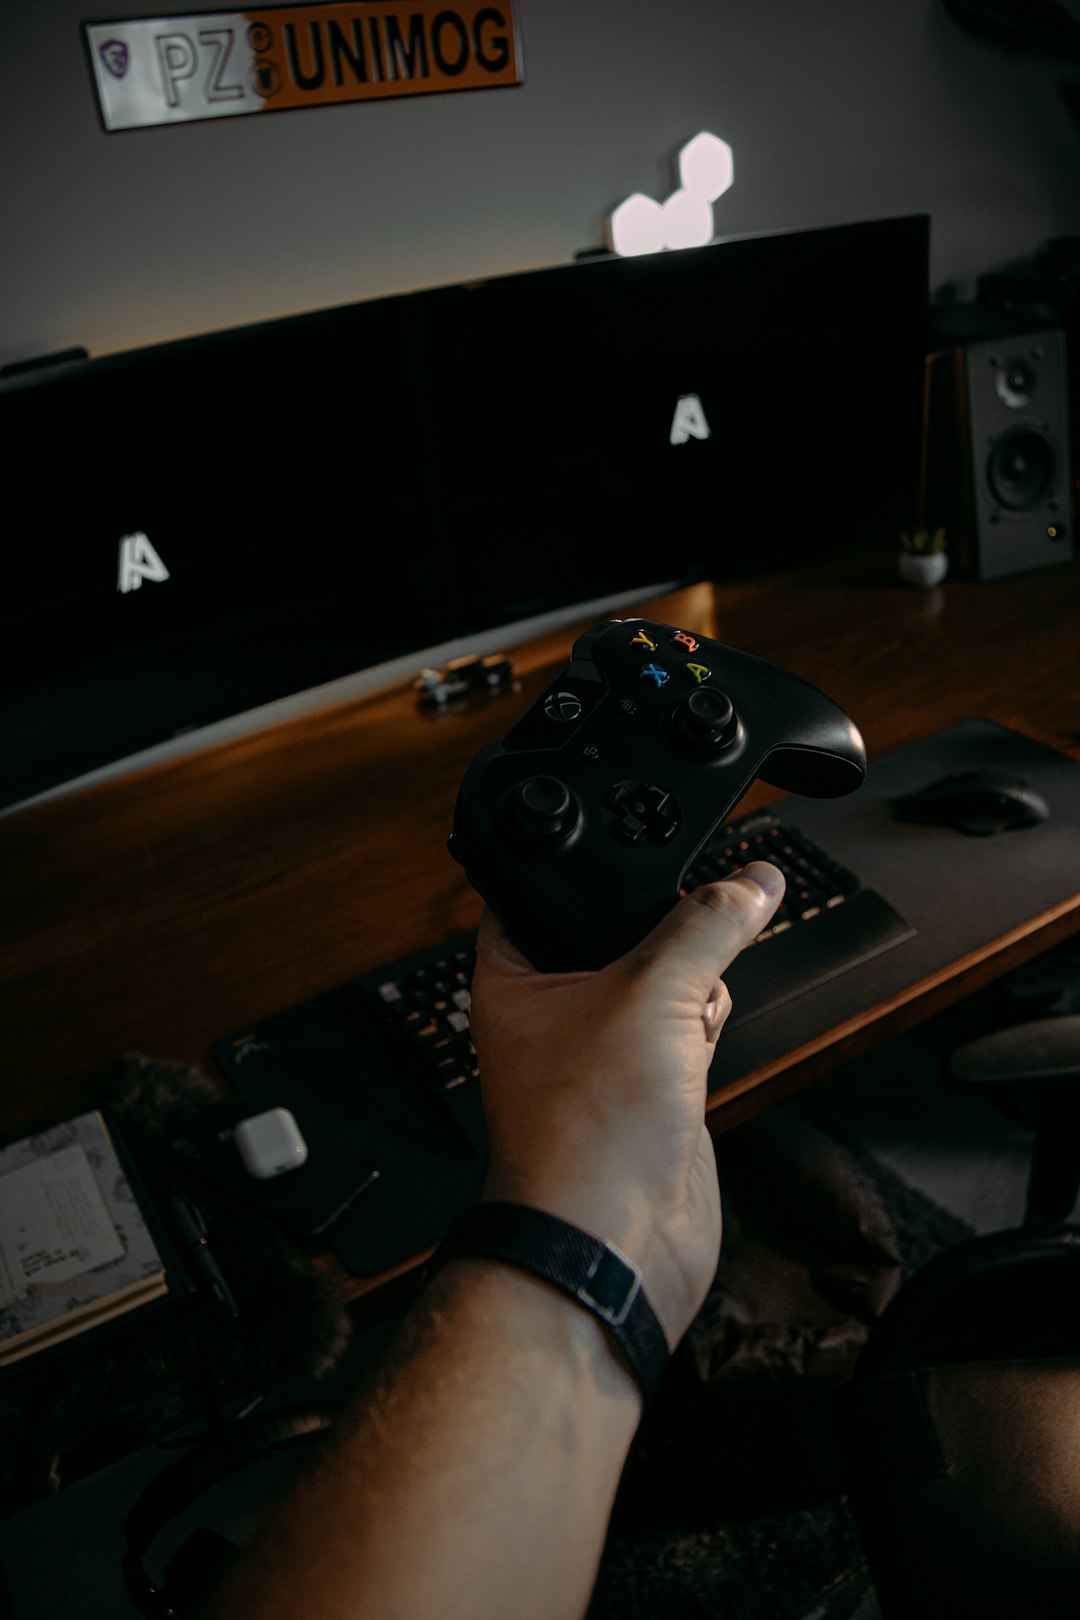 person holding black xbox one game controller